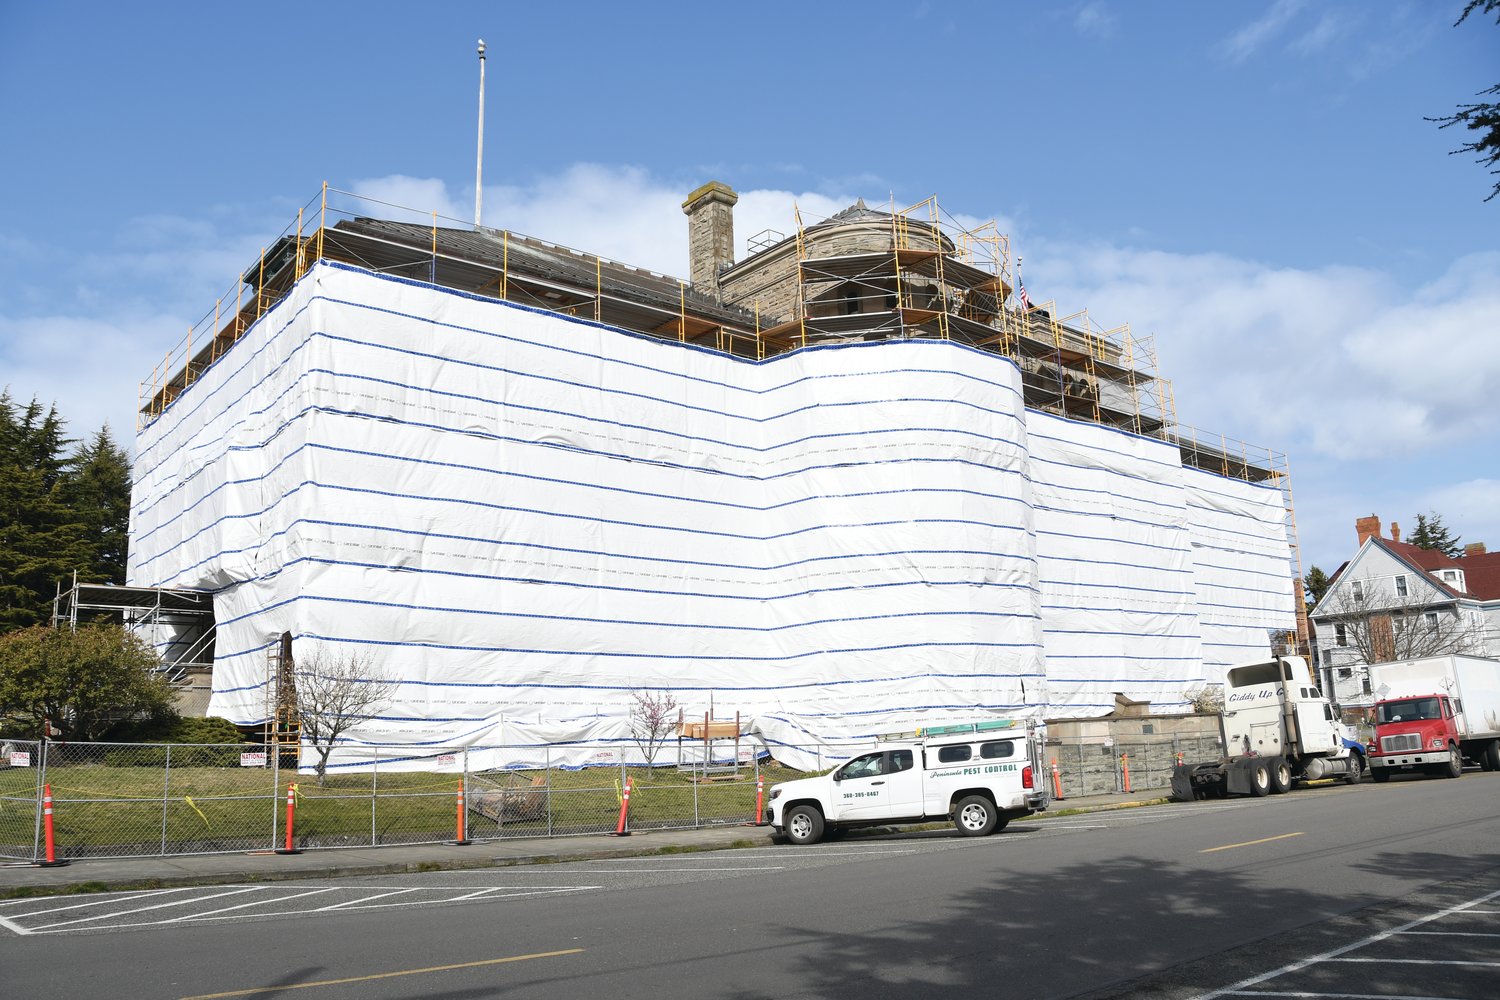 The Port Townsend Post Office is currently surrounded by 
construction tarps and scaffolding as construction continues to repair, remove, and renovate windows and other features of the historic building, built in 1893.